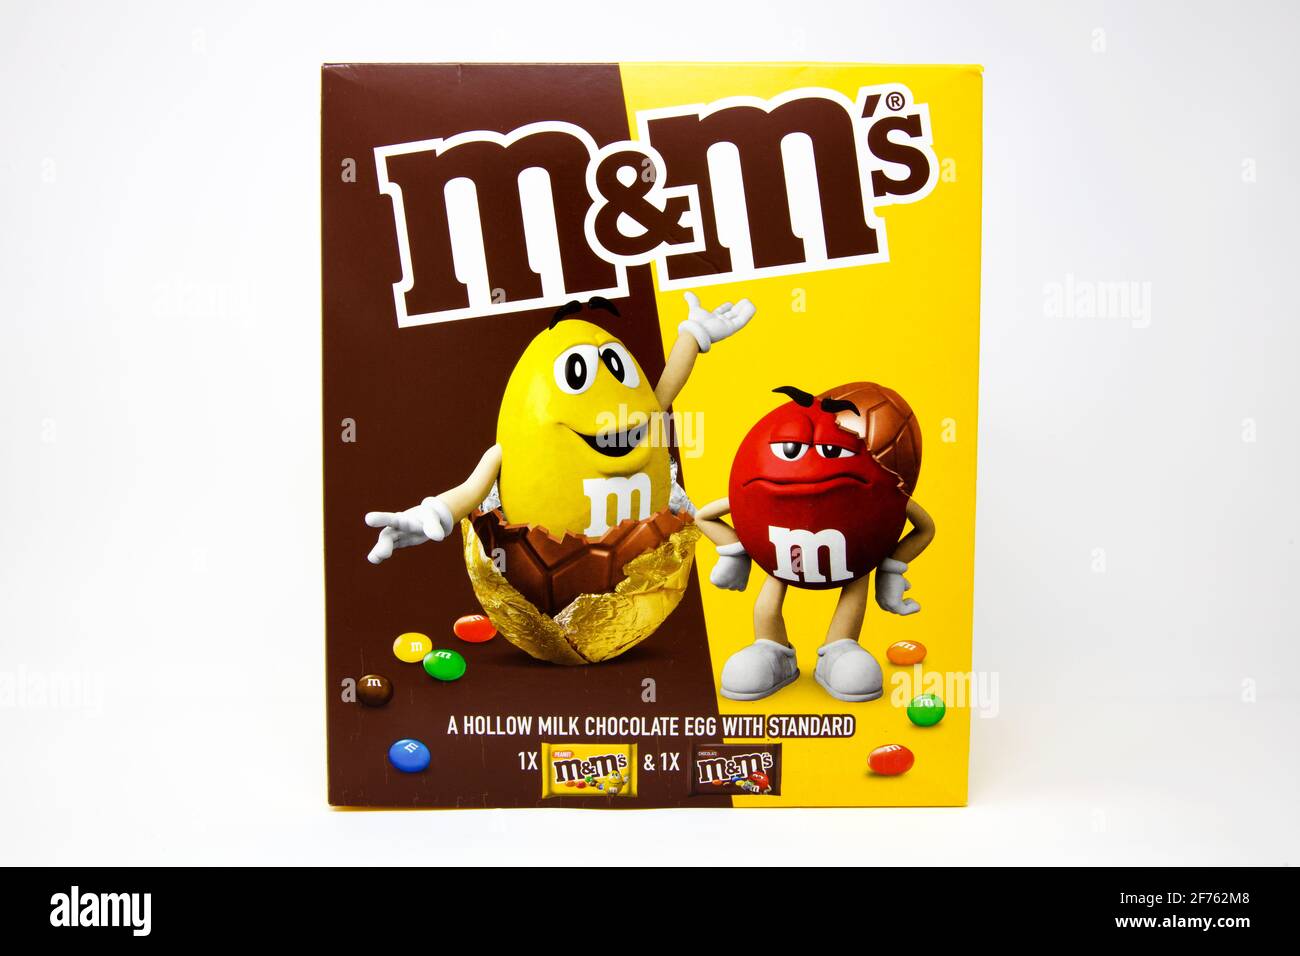 M&M's Peanut Chocolate More To Share Pouch 268 G